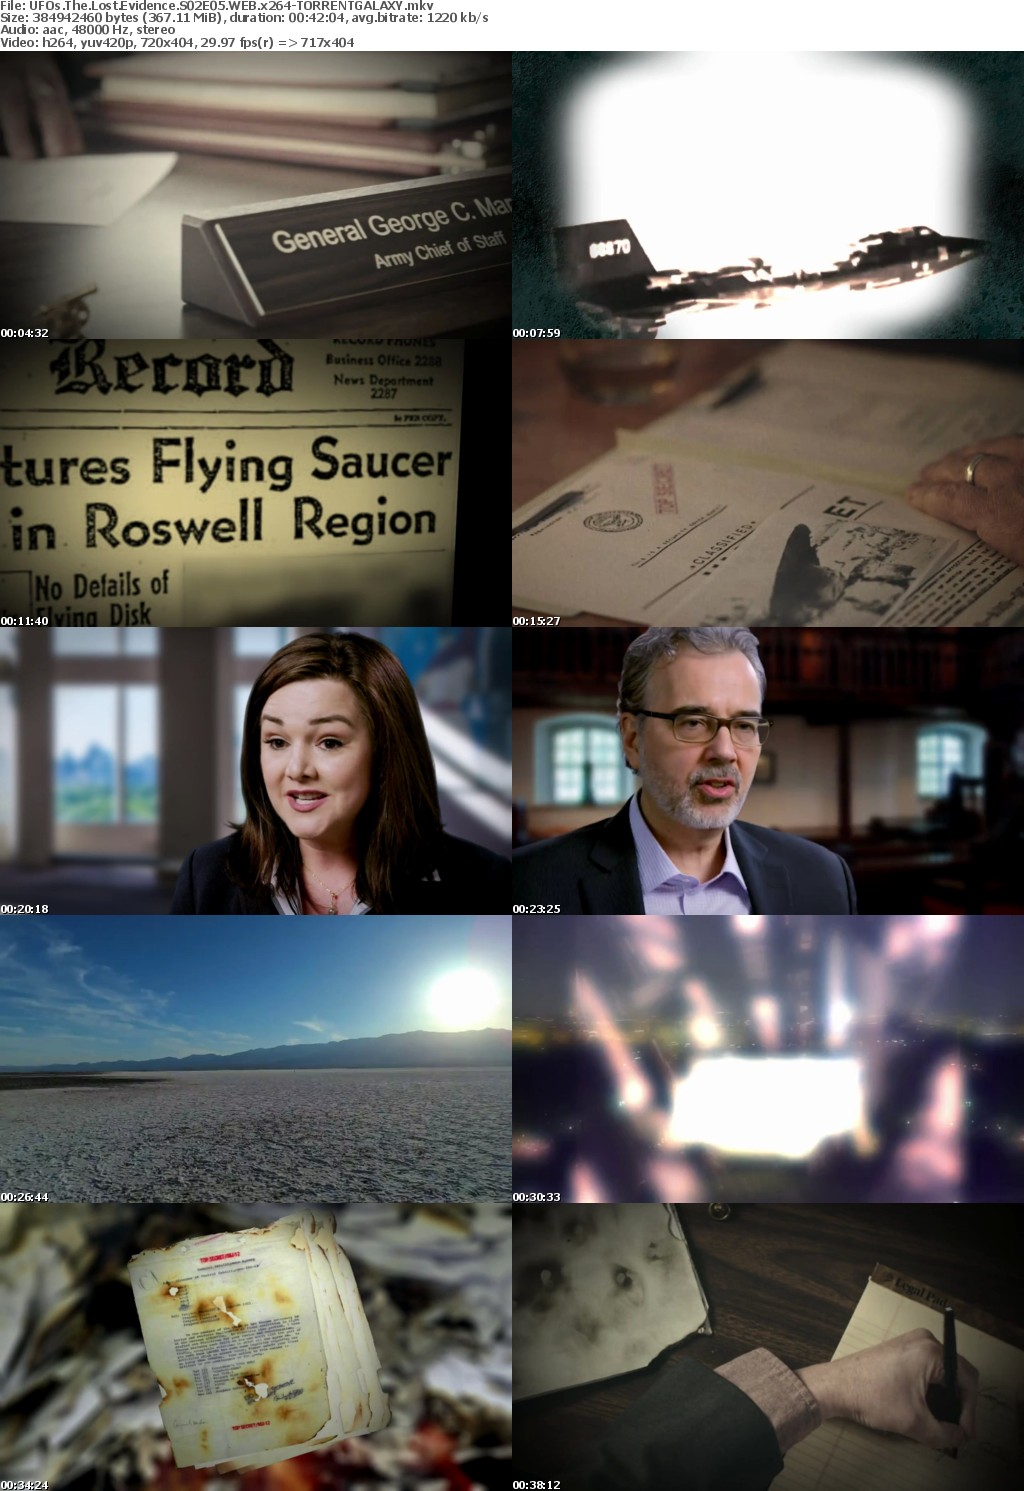 UFOs The Lost Evidence S02E05 WEB x264-GALAXY